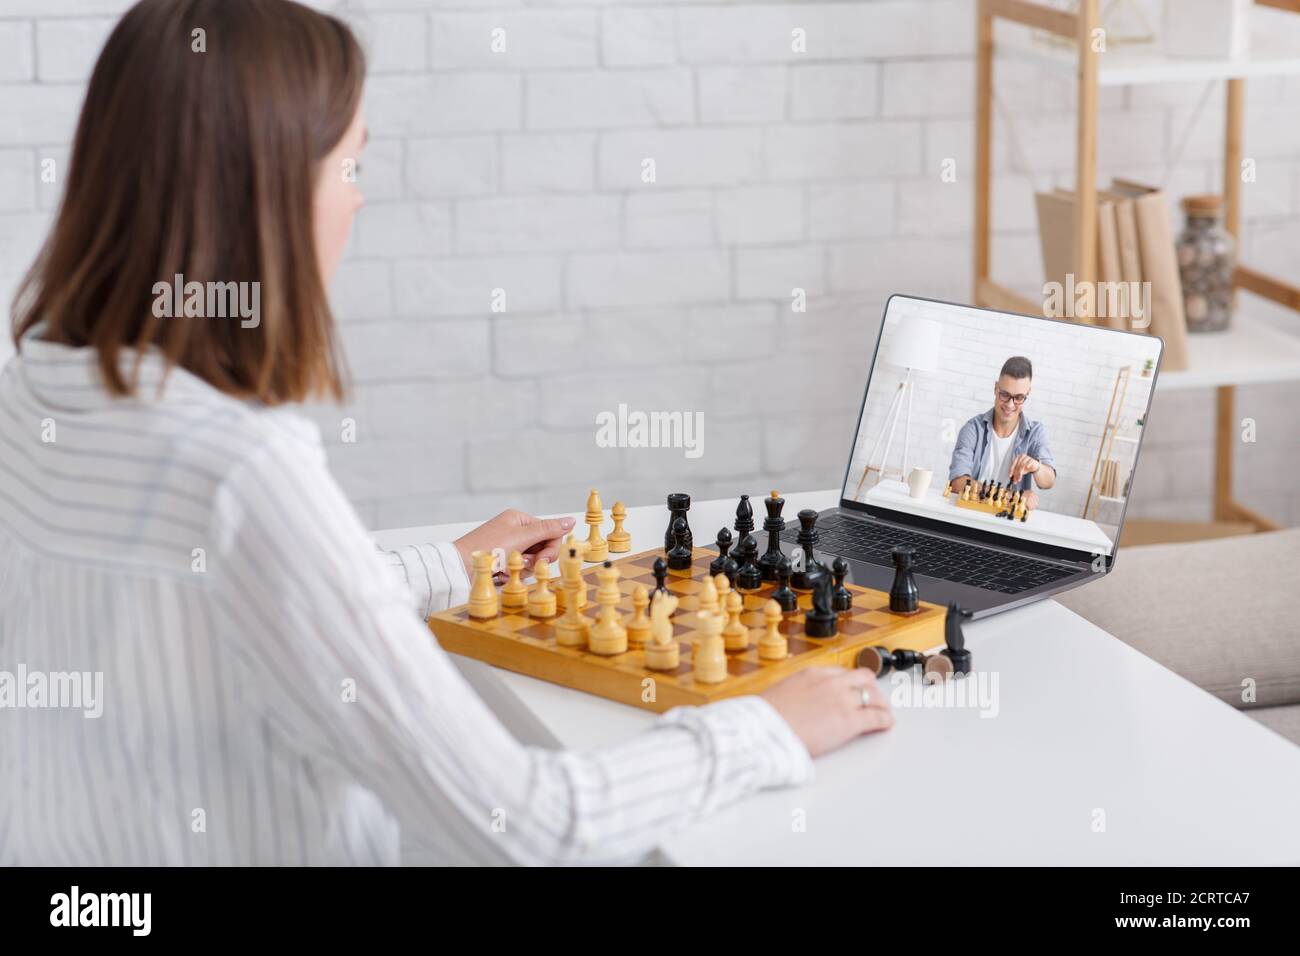 Online chess at home. Woman and guy play on board games using laptop Stock Photo